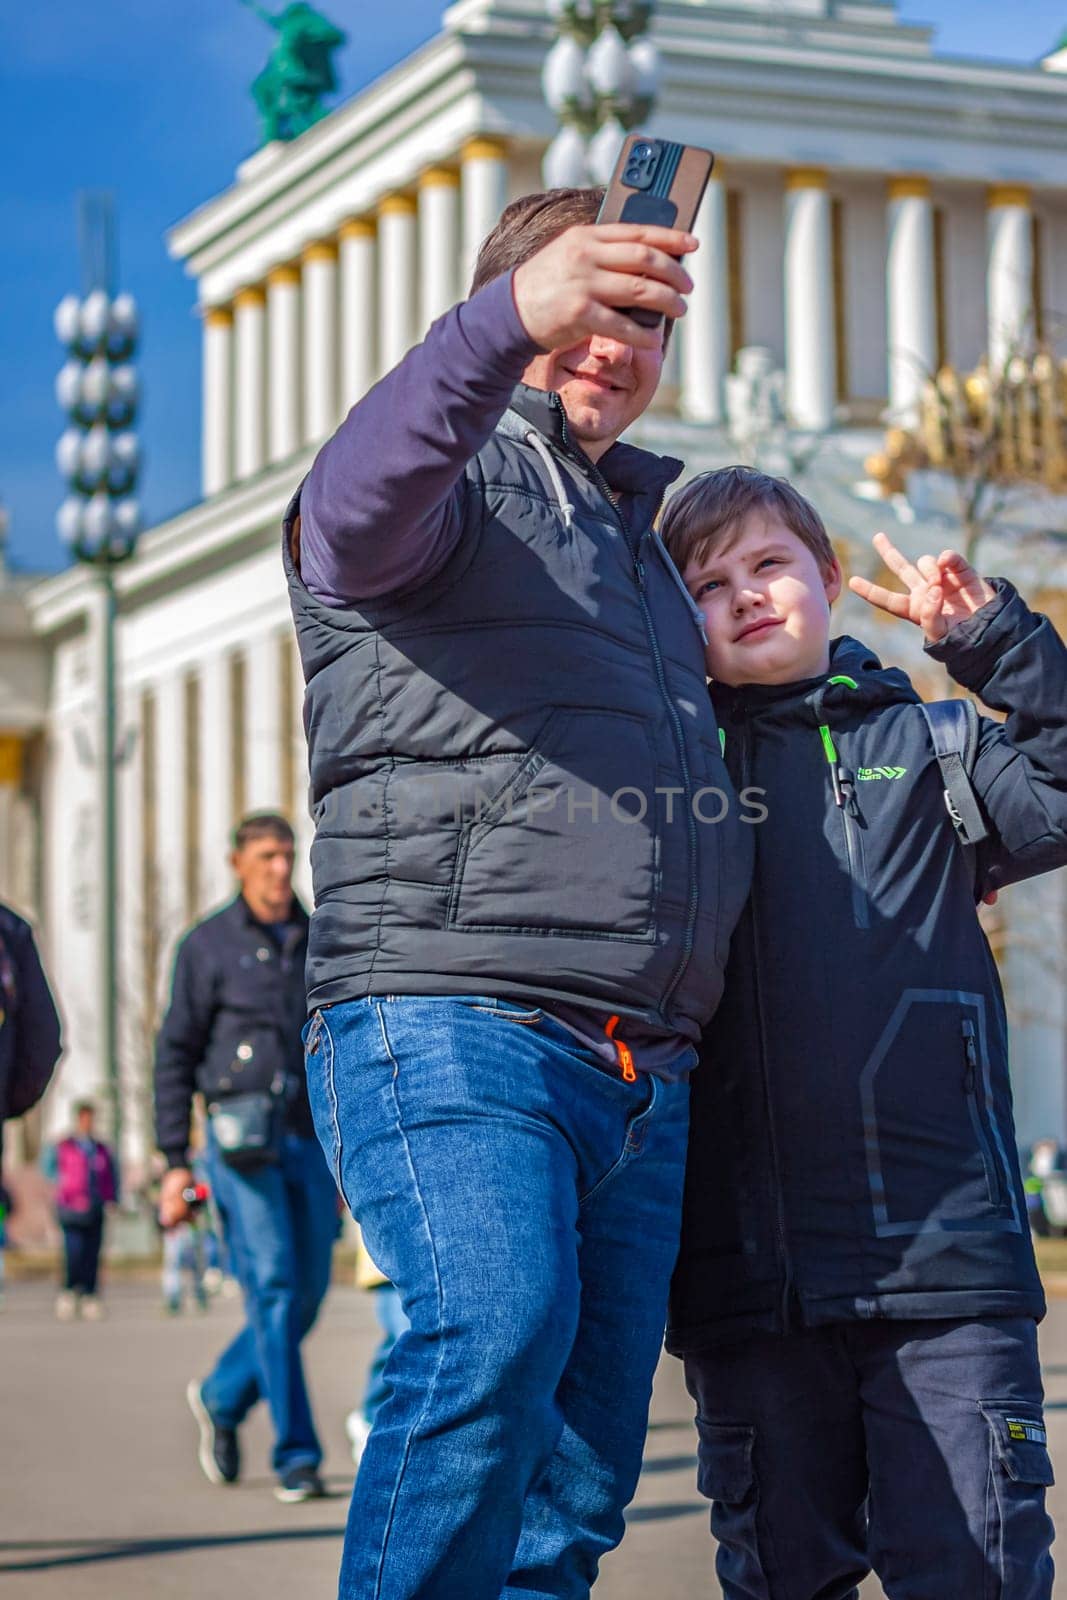 2023-04-08. Moscow, Russia. A man and a boy take a selfie on a smartphone in the city center near an architectural building.  by Alina_Lebed